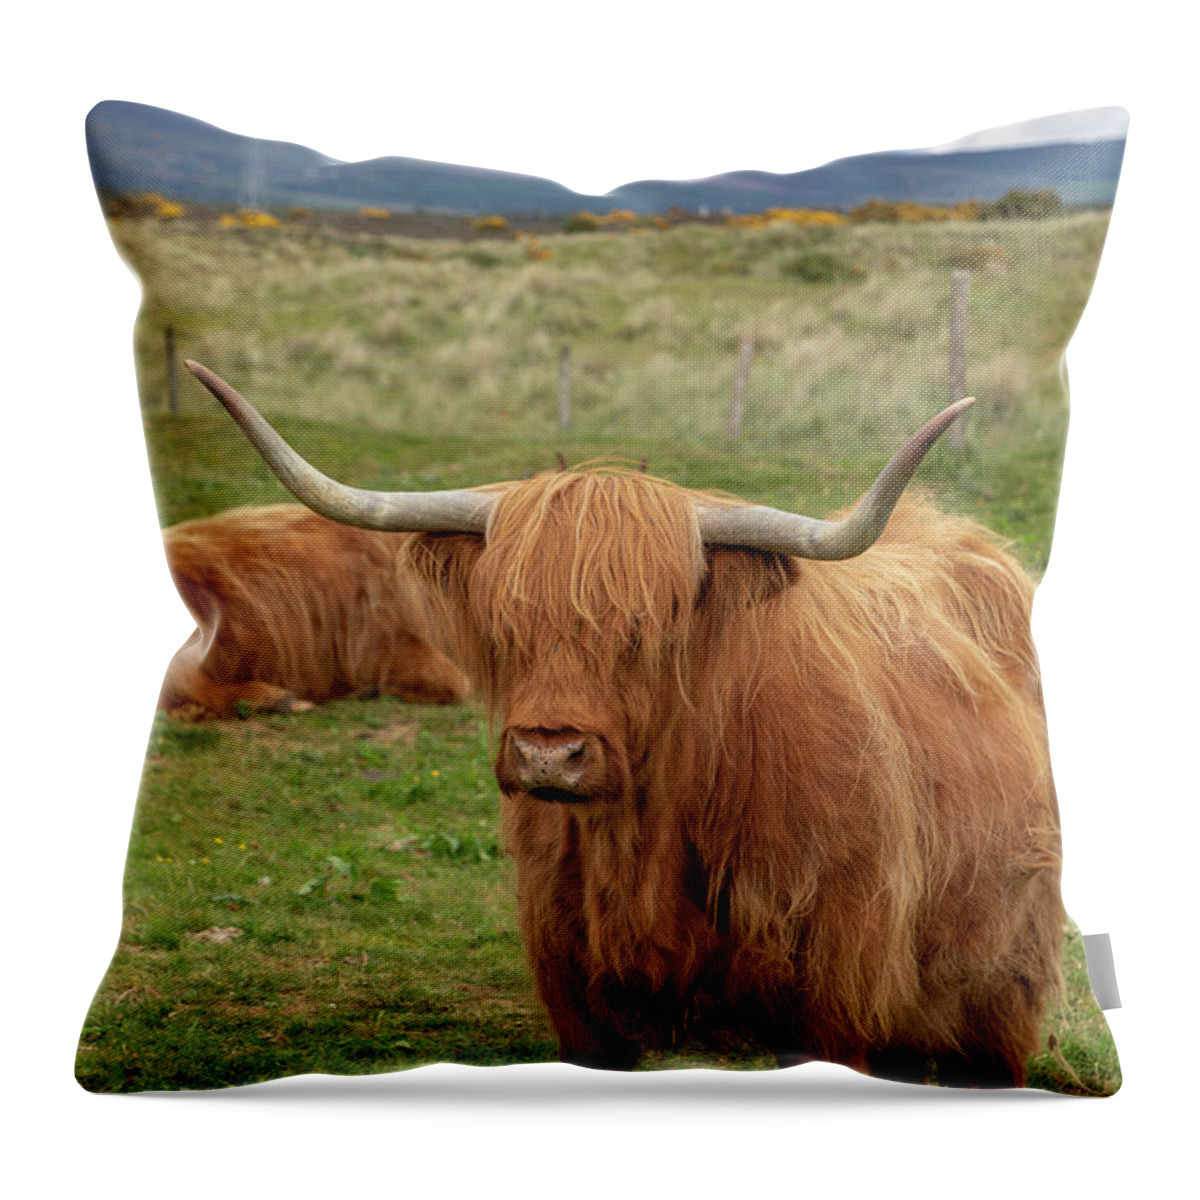 Animal Throw Pillow featuring the photograph Highland Cow 1396 by Teresa Wilson